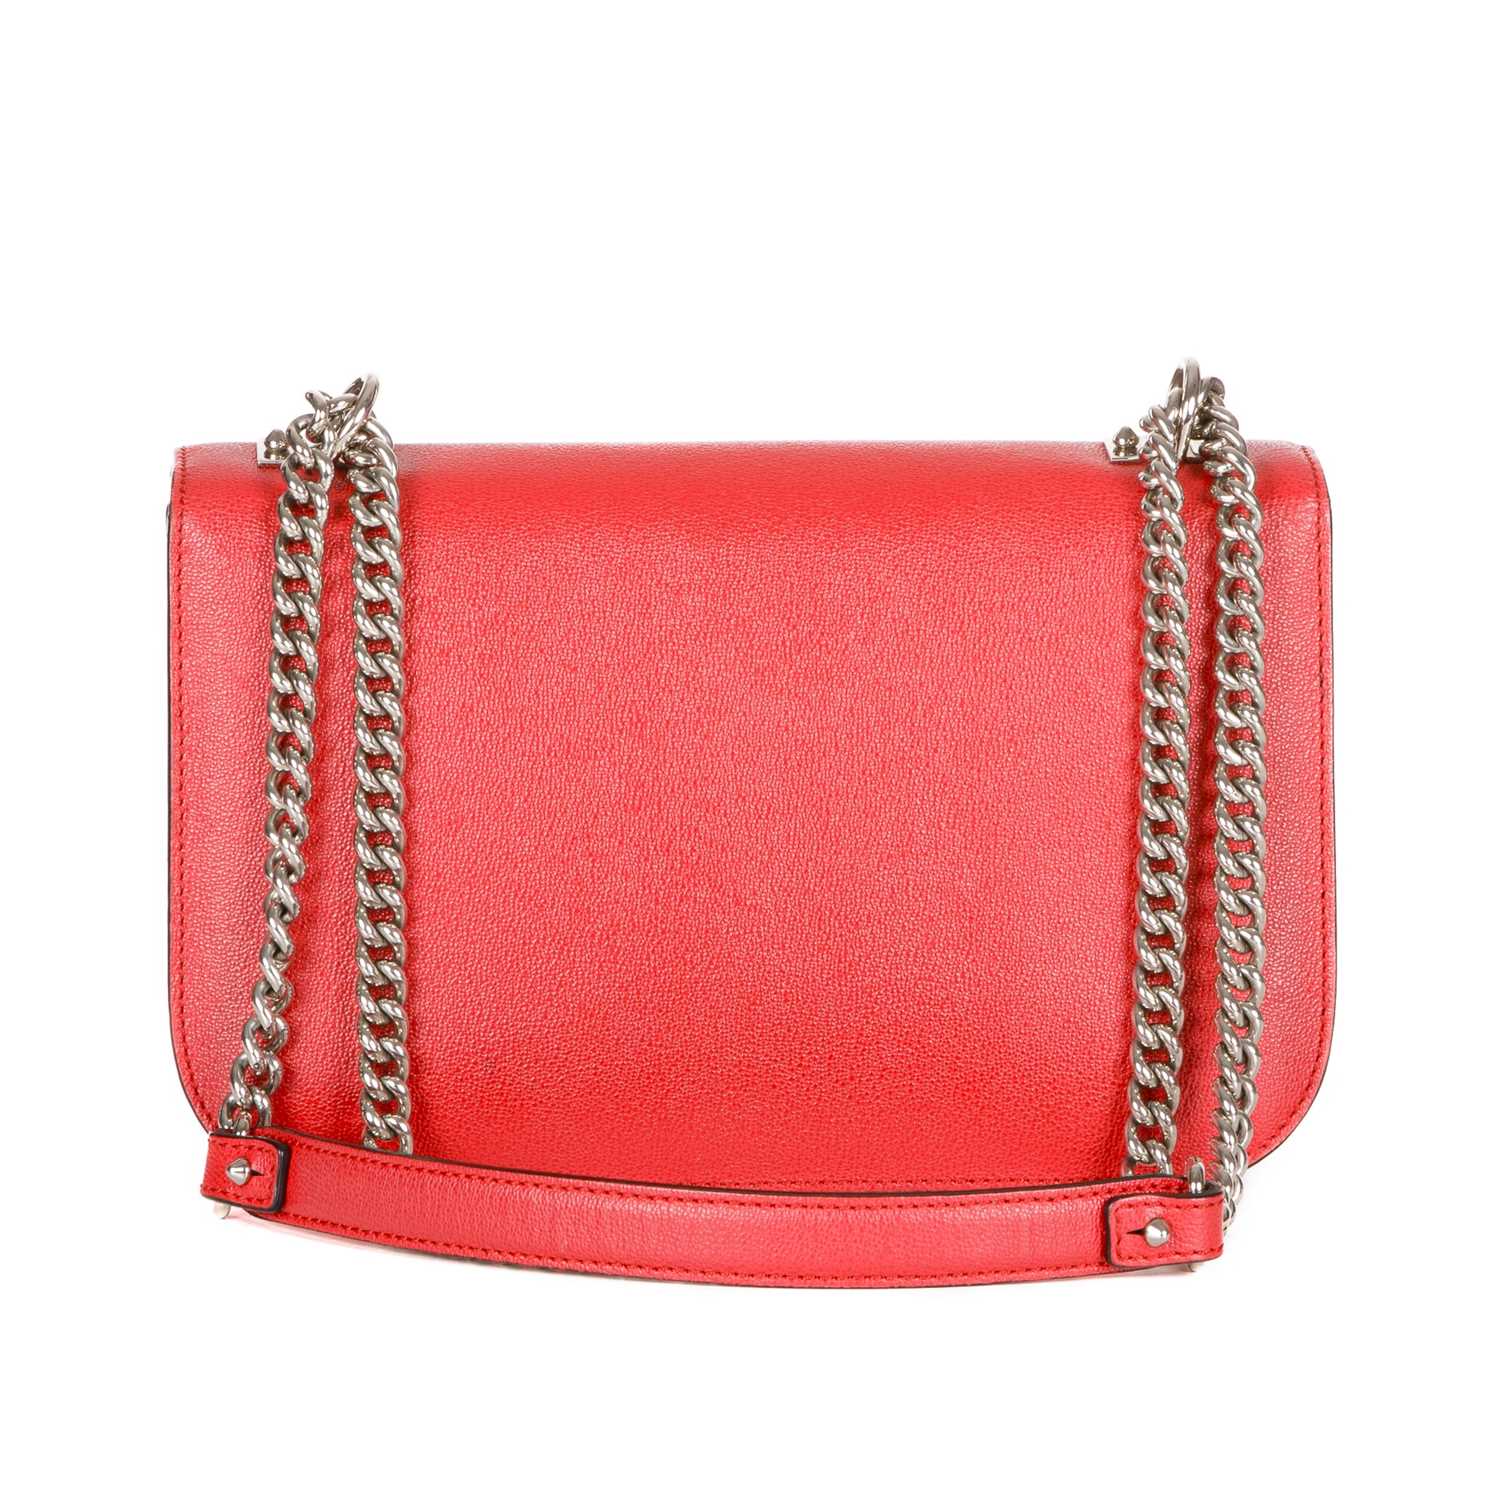 Alexander McQueen, an AMQ Insignia Chain handbag, crafted from red calfskin leather, with polished - Image 3 of 5